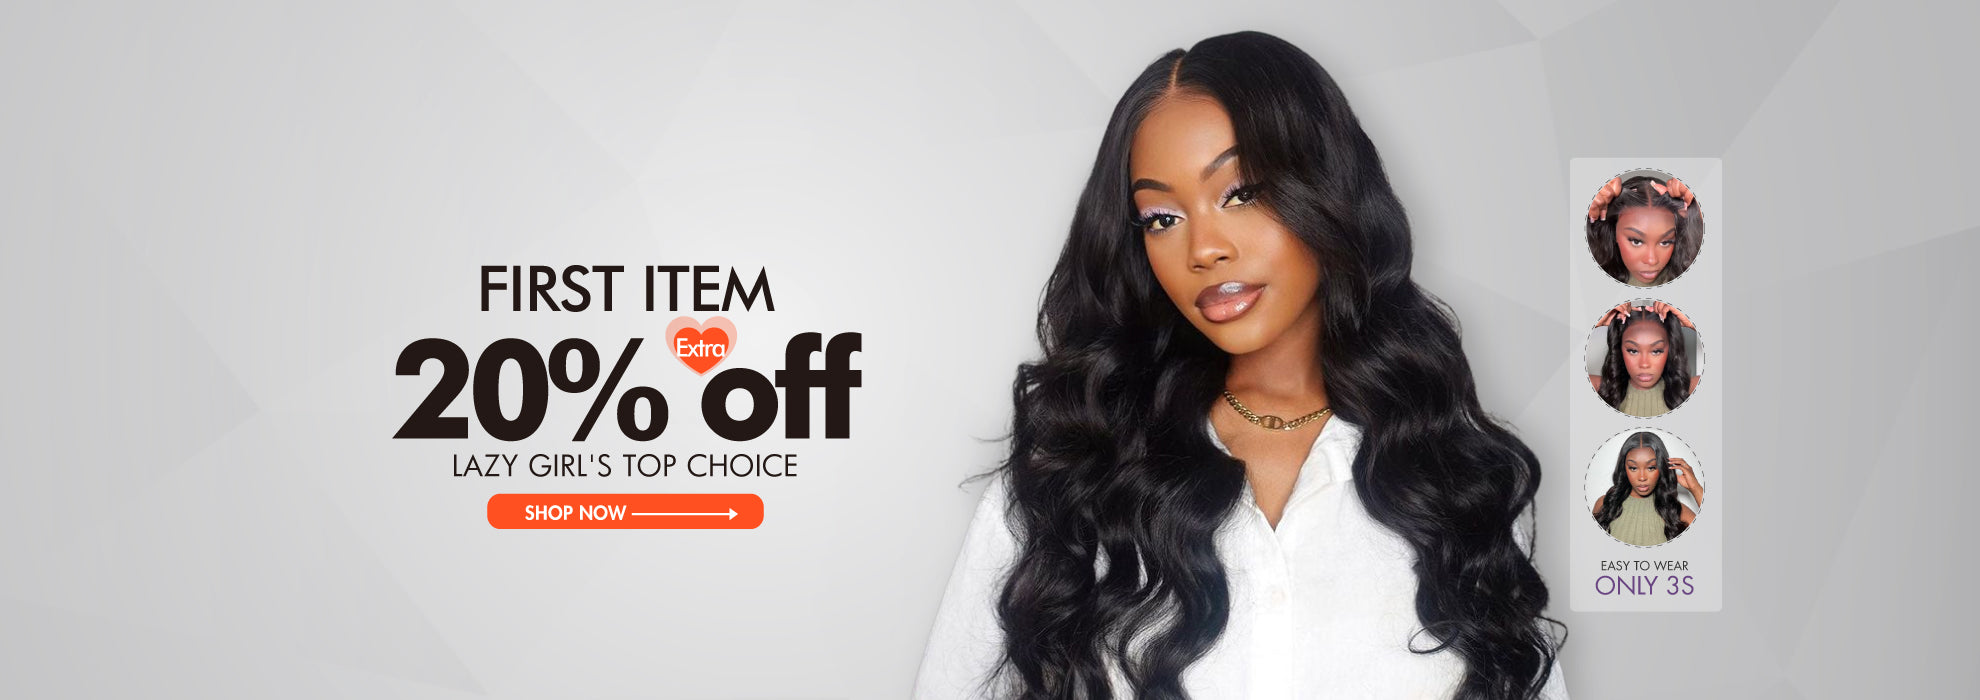 shop now get 60% and extra 20%OFF,NO LIMIT